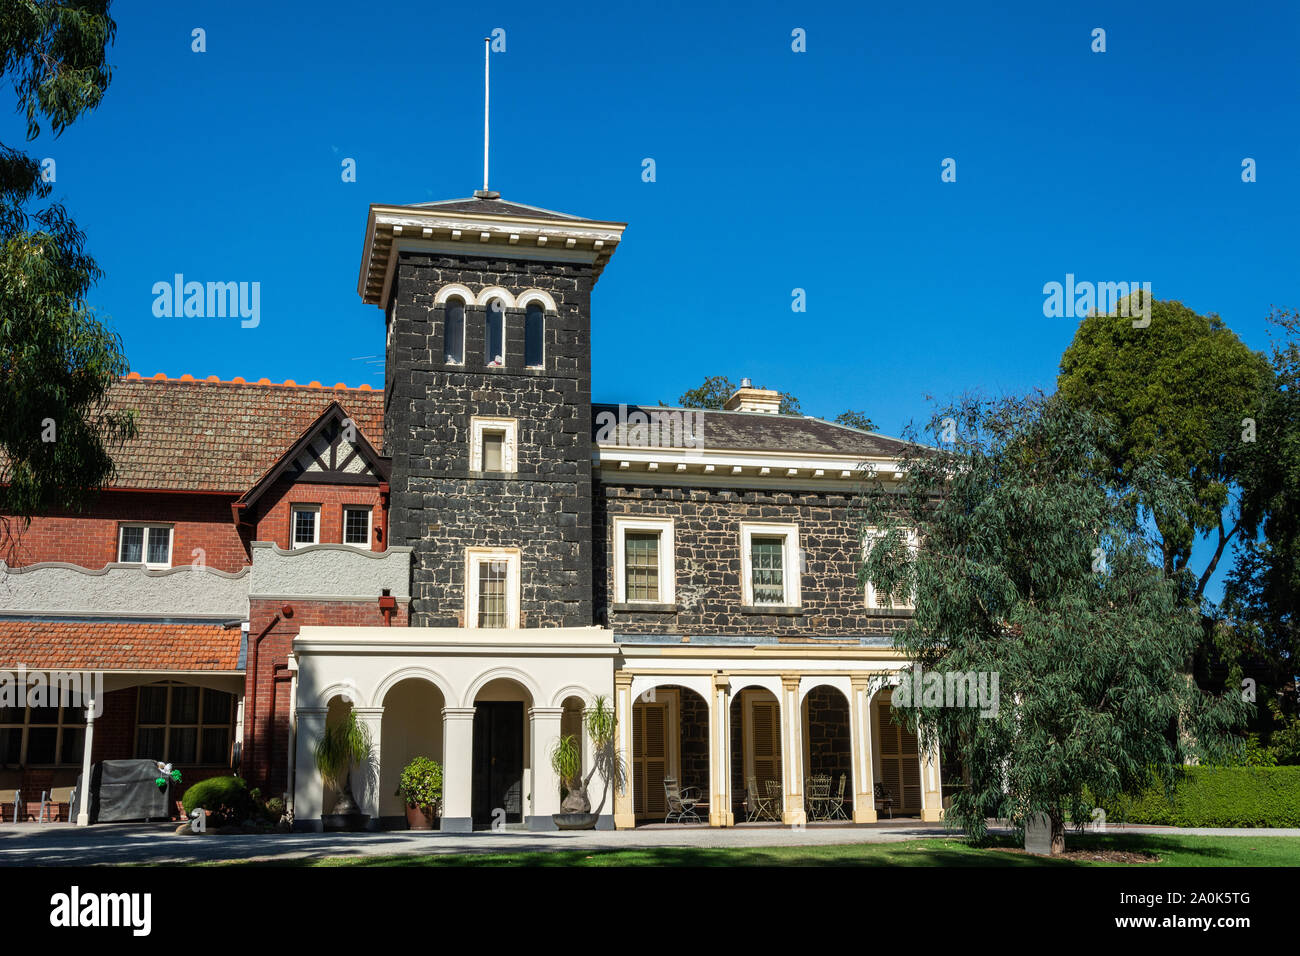 Melbourne, Australia - March 8, 2017. Bishopscourt building, dating from 1853, in Melbourne. The building was designed by Newson and Blackburn and is Stock Photo